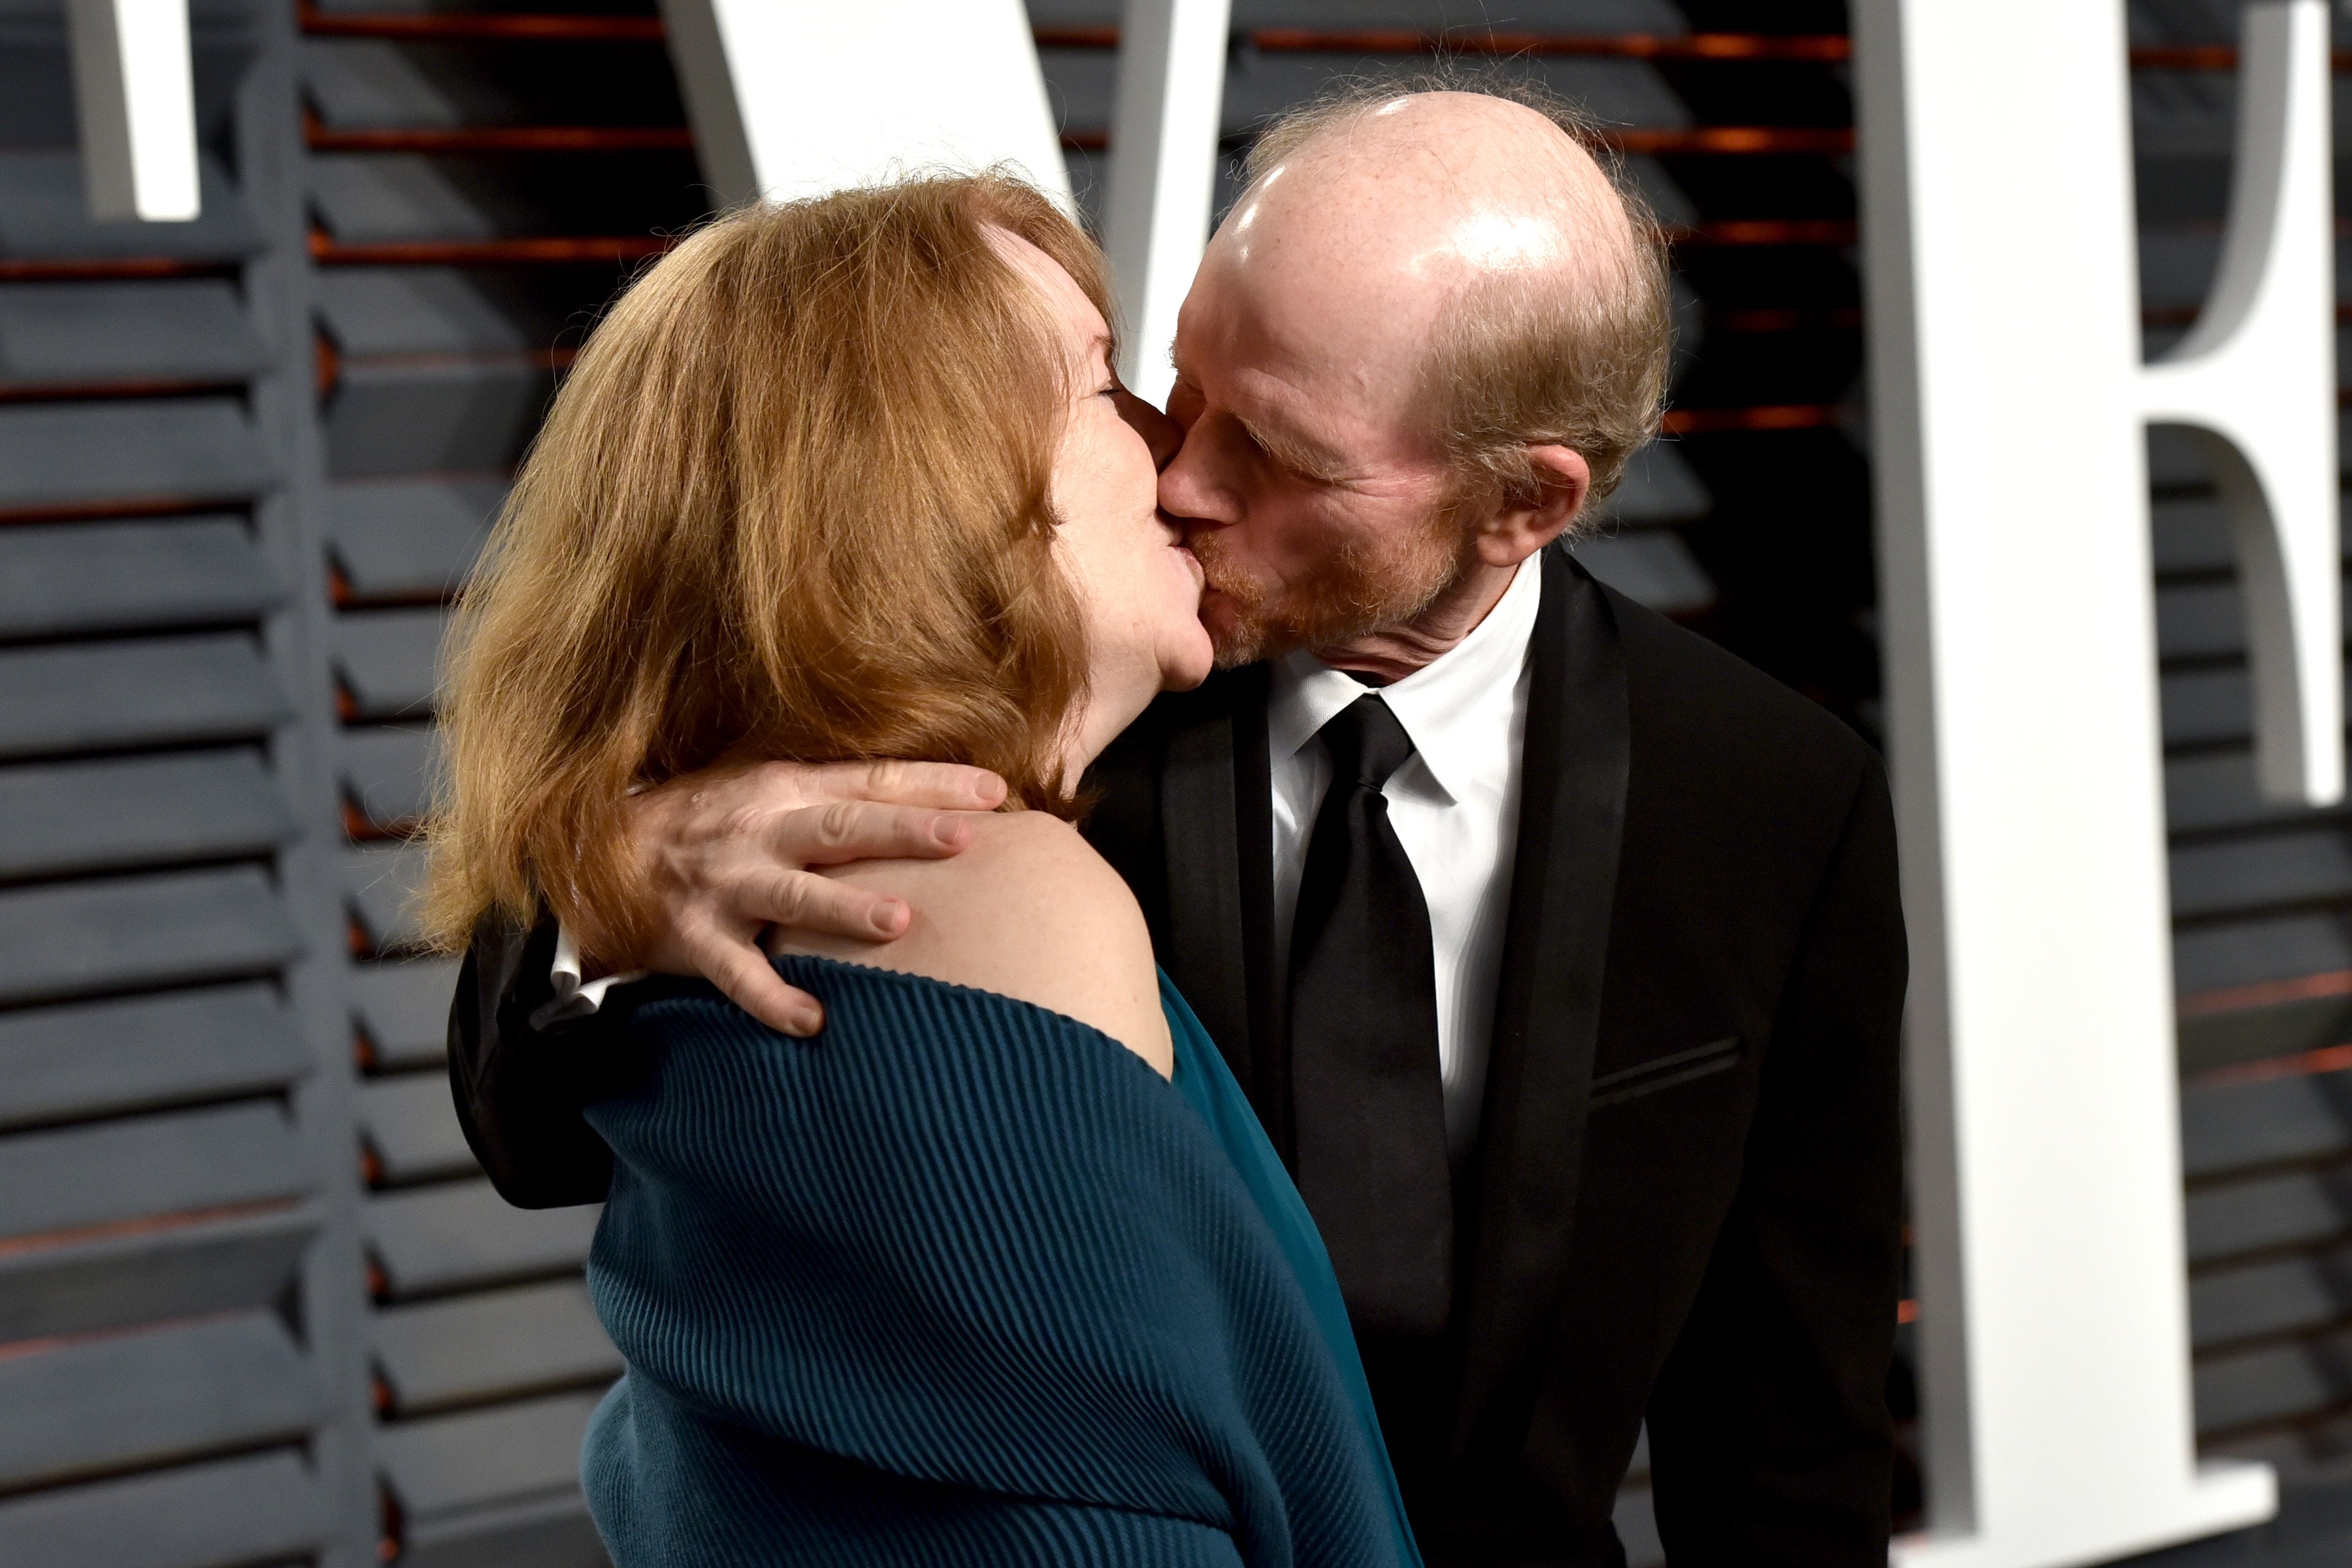 Ron Howard and Cheryl share a kiss at the 2017 Vanity Fair Oscar Party | Source: Getty Images